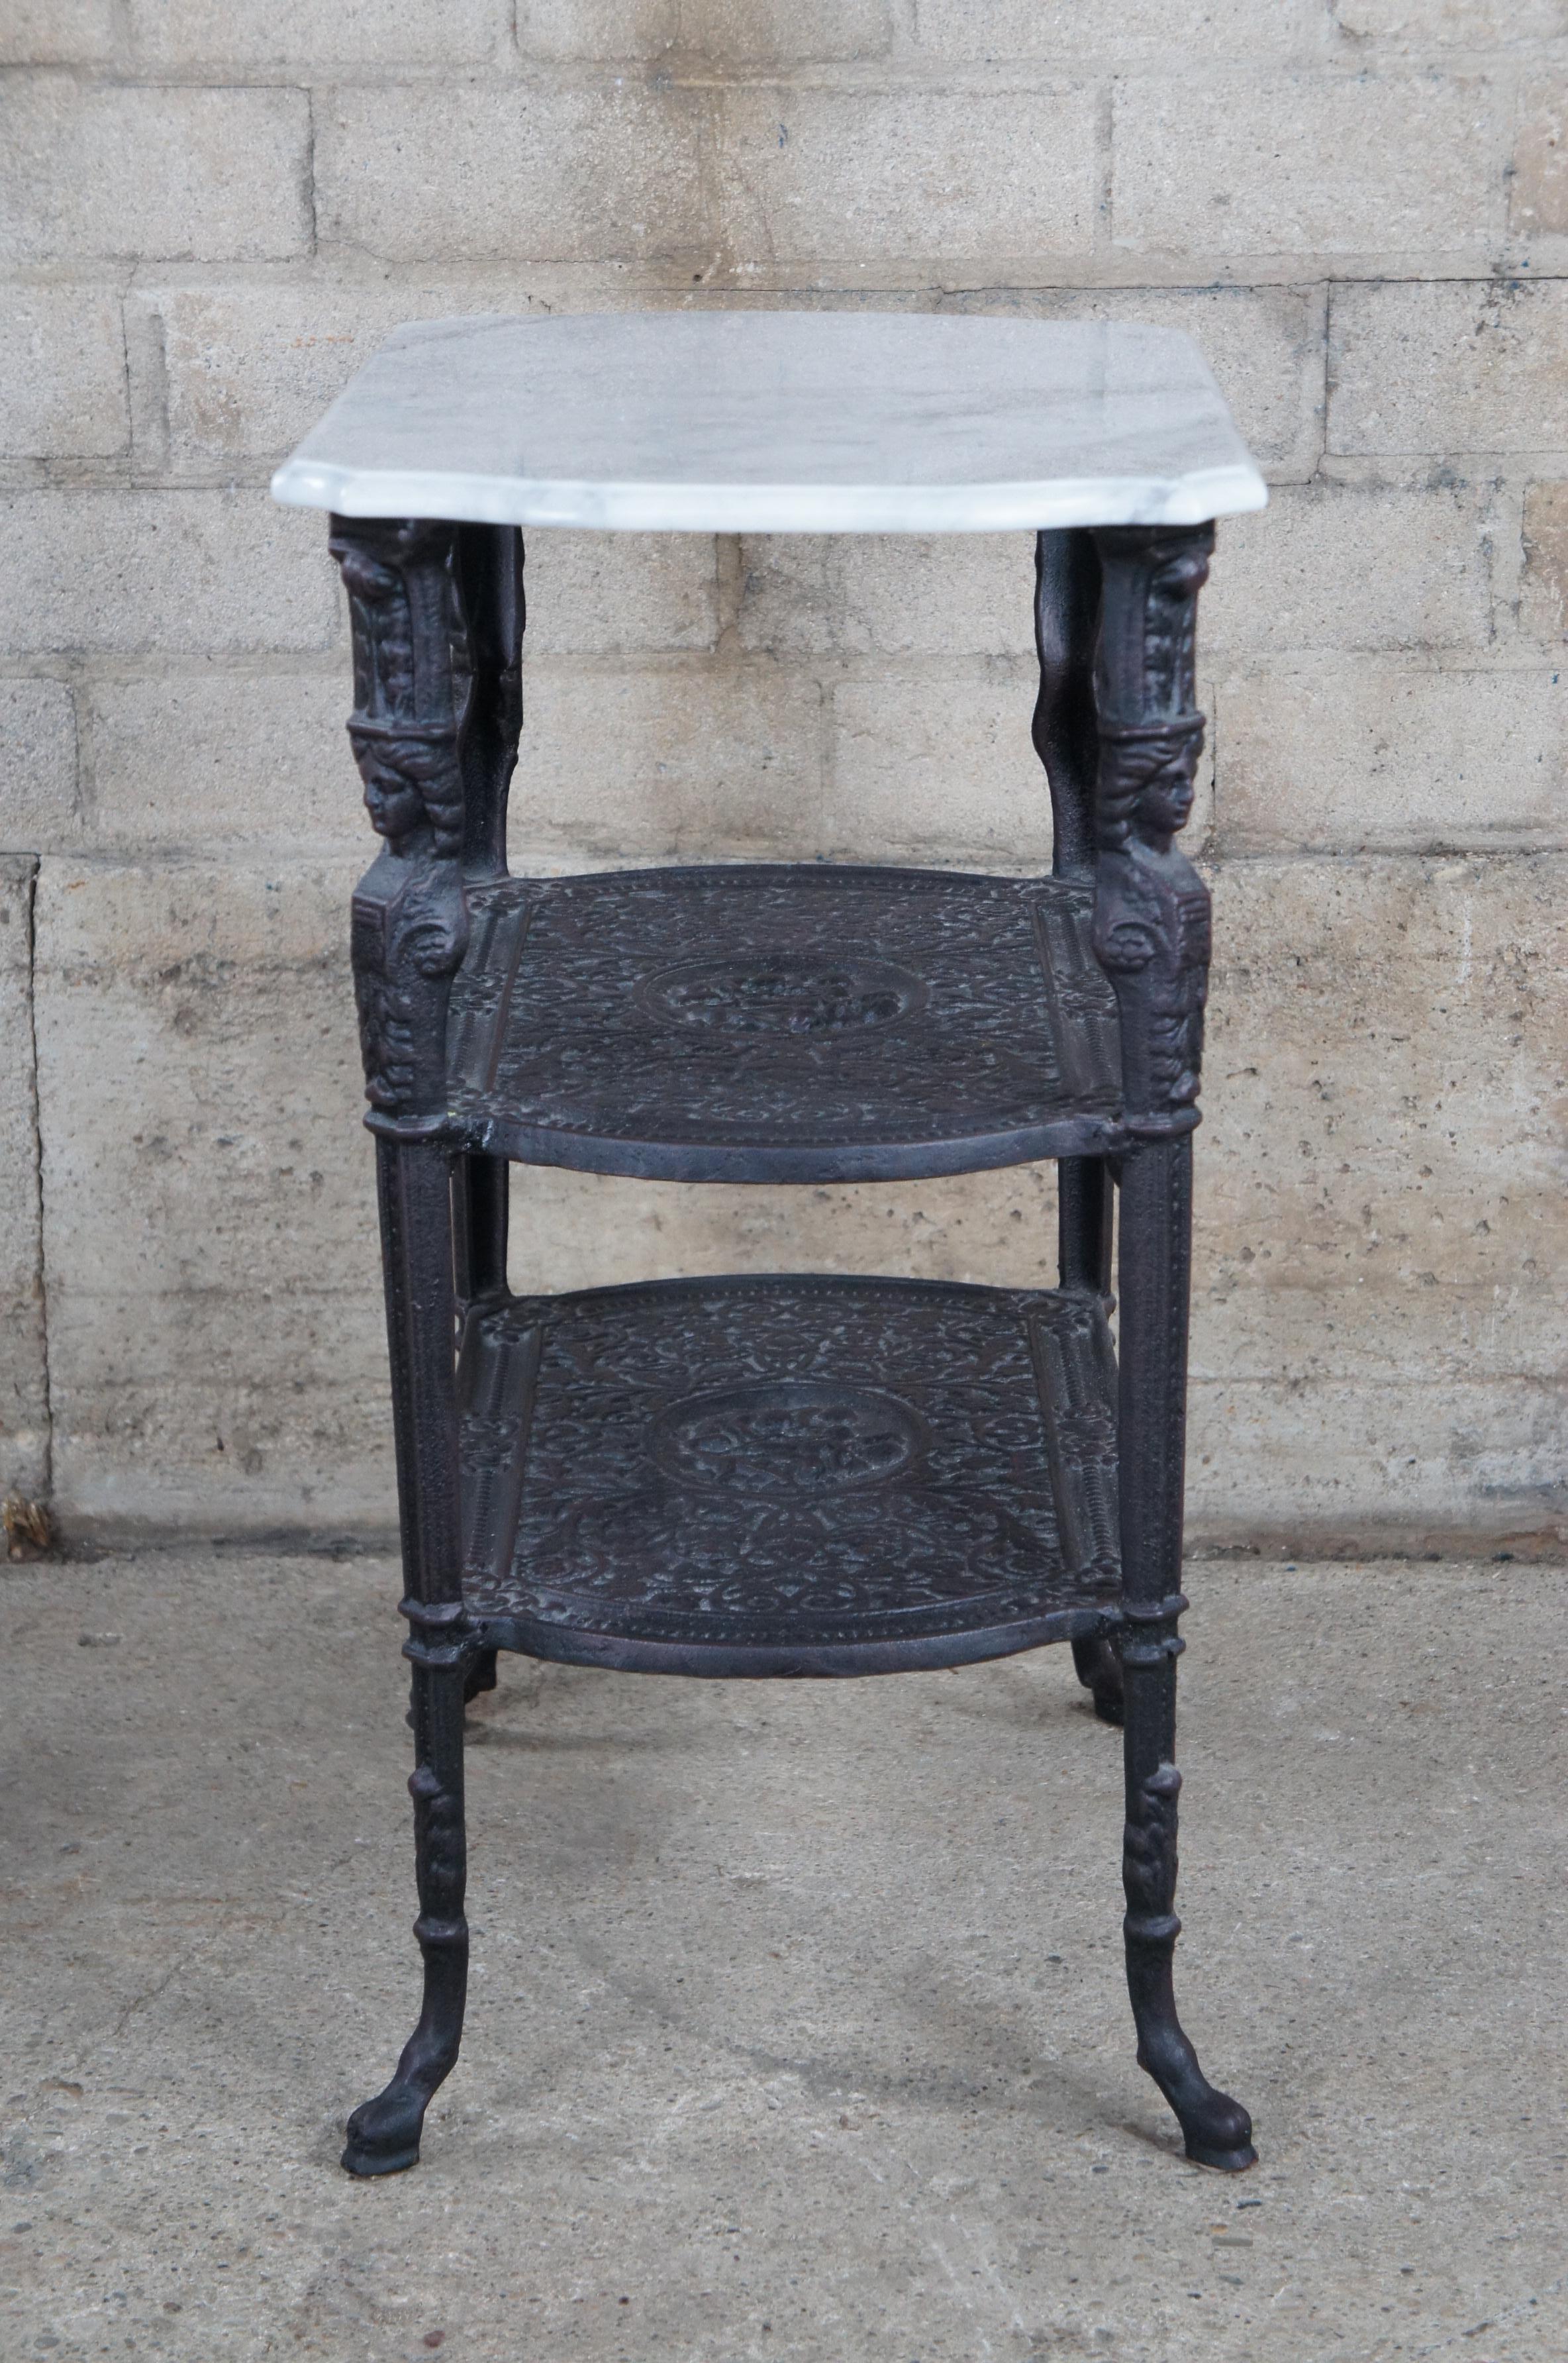 Vintage Cast Iron Marble 3 Tier Egyptian Revival Caryatid Parlor Side Table  5